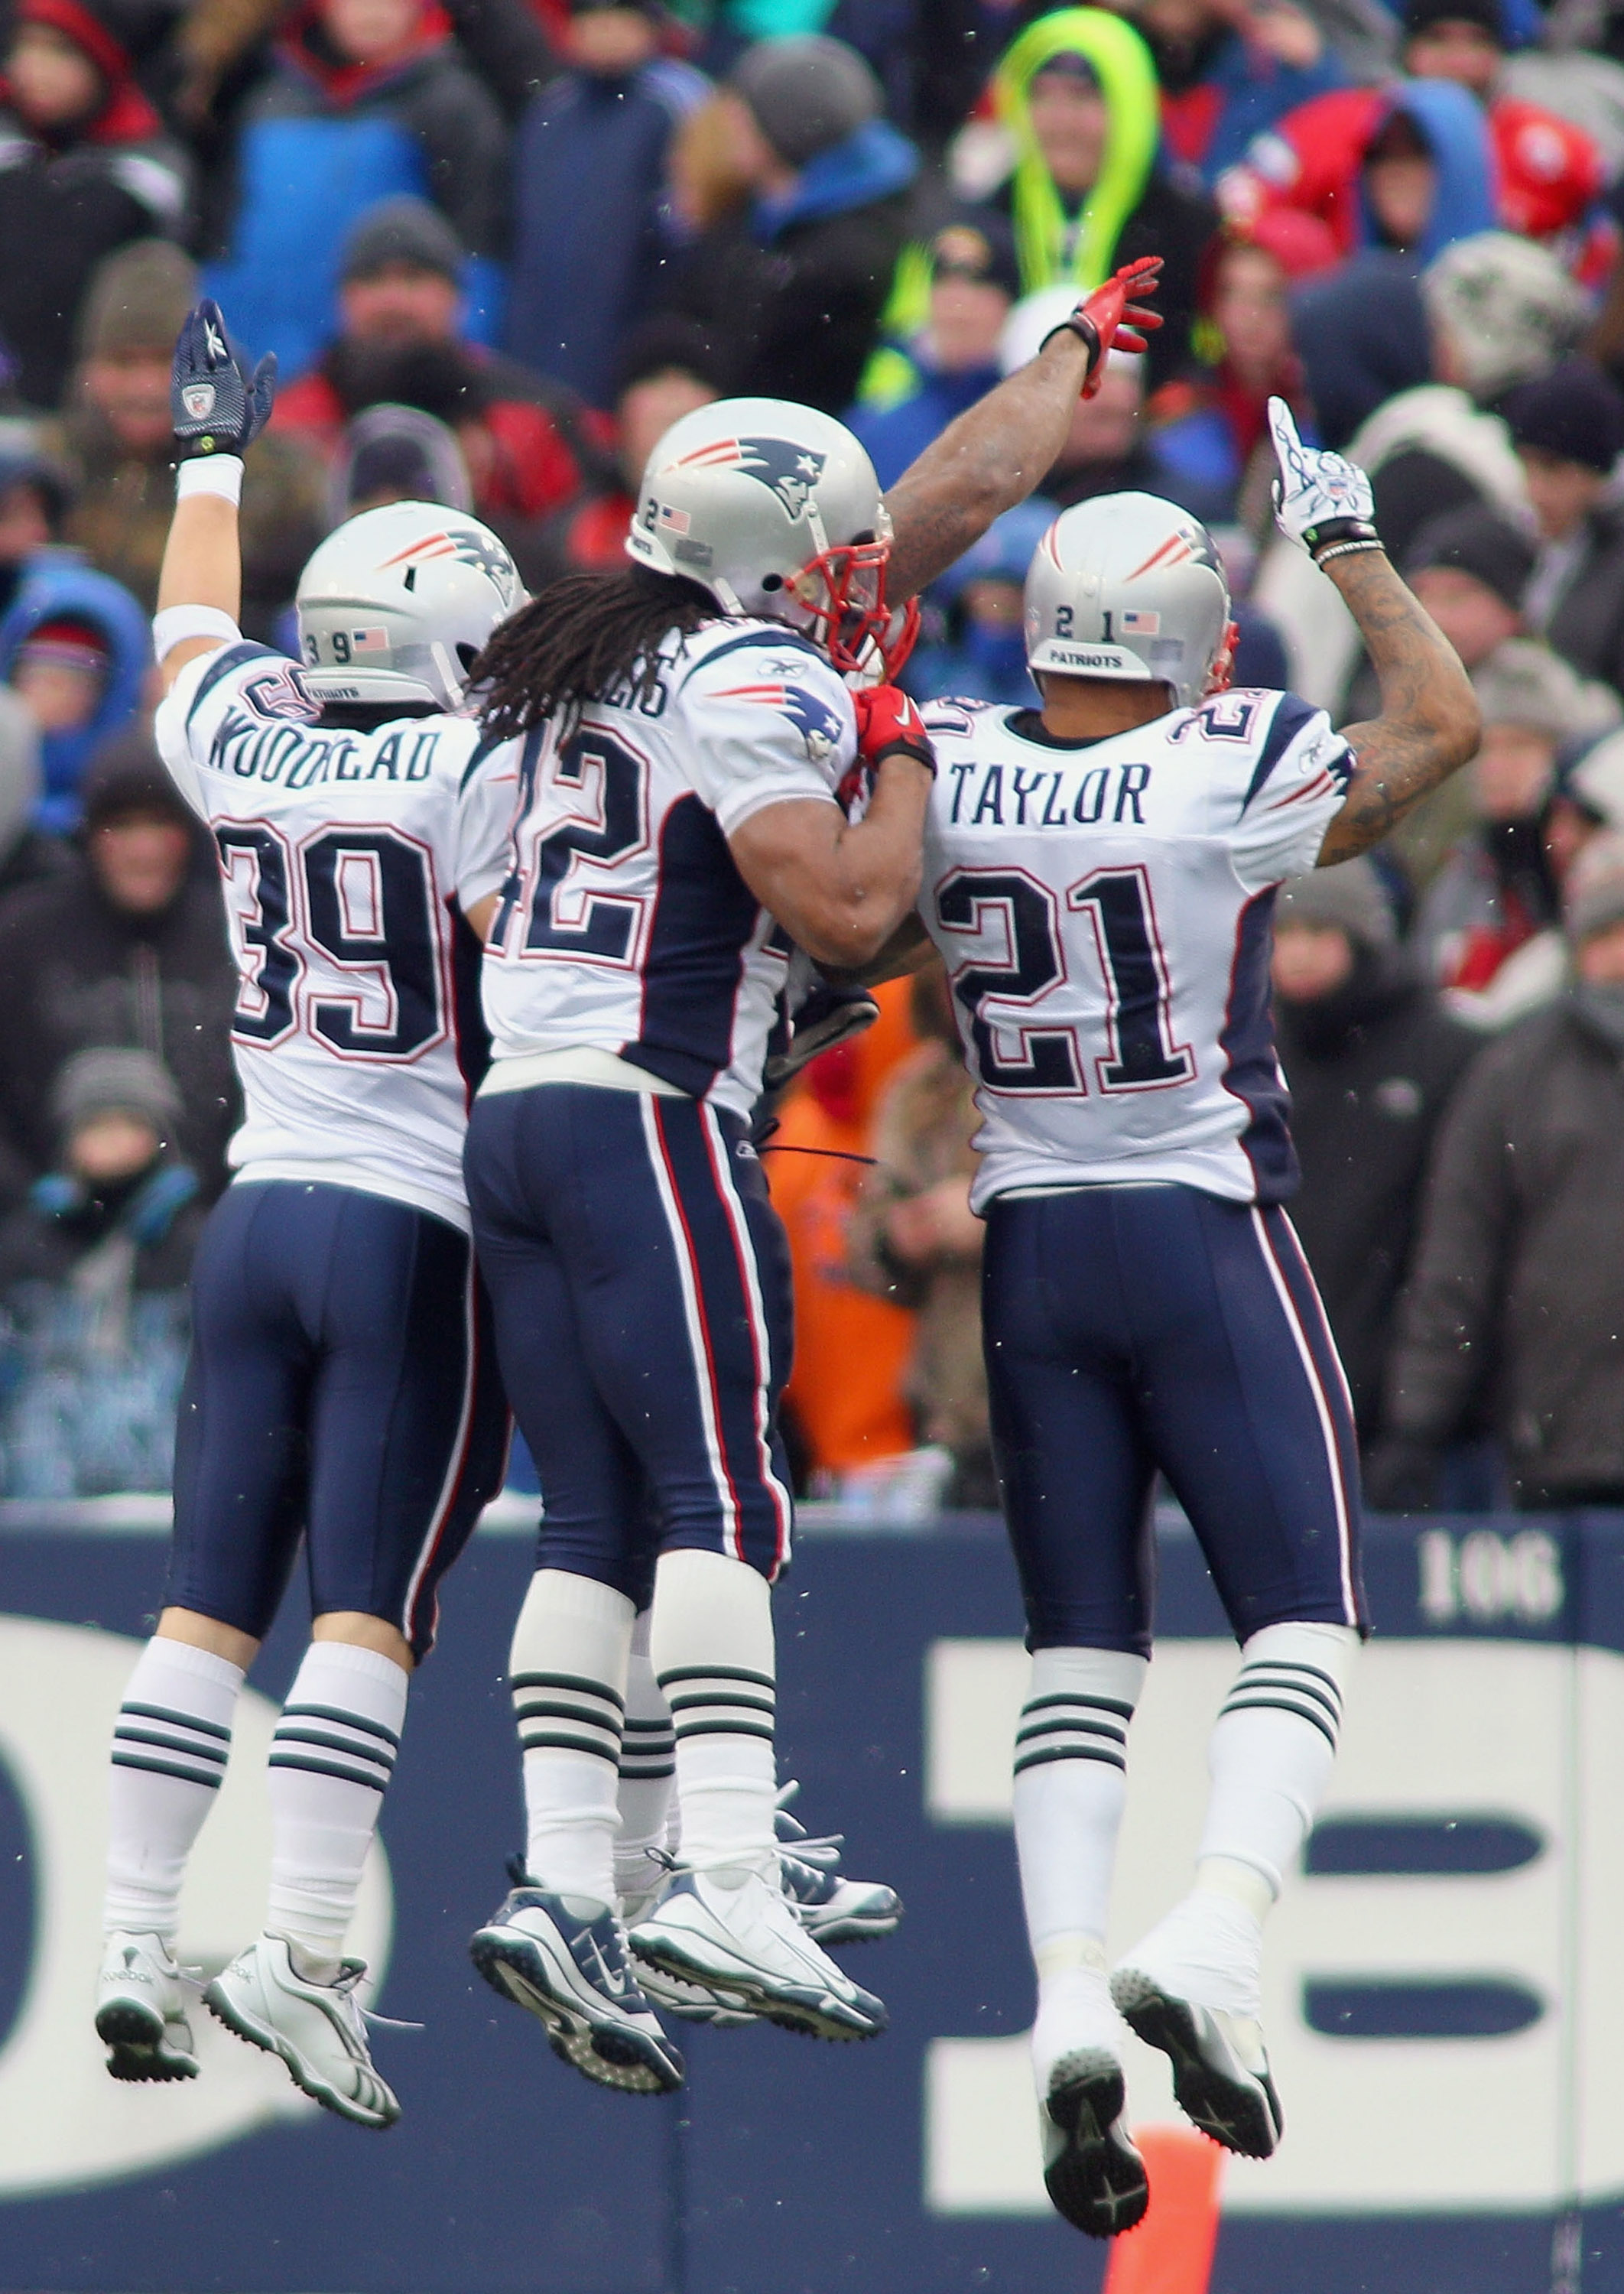 ORCHARD PARK, NY - DECEMBER 26: Danny Woodhead #39, Benjarvus Green-Ellis #42, and Fred Taylor #21  of the Patriots celebrate a touchdown in the first quarter against the Buffalo Bills at Ralph Wilson Stadium on December 26, 2010 in Orchard Park, New York